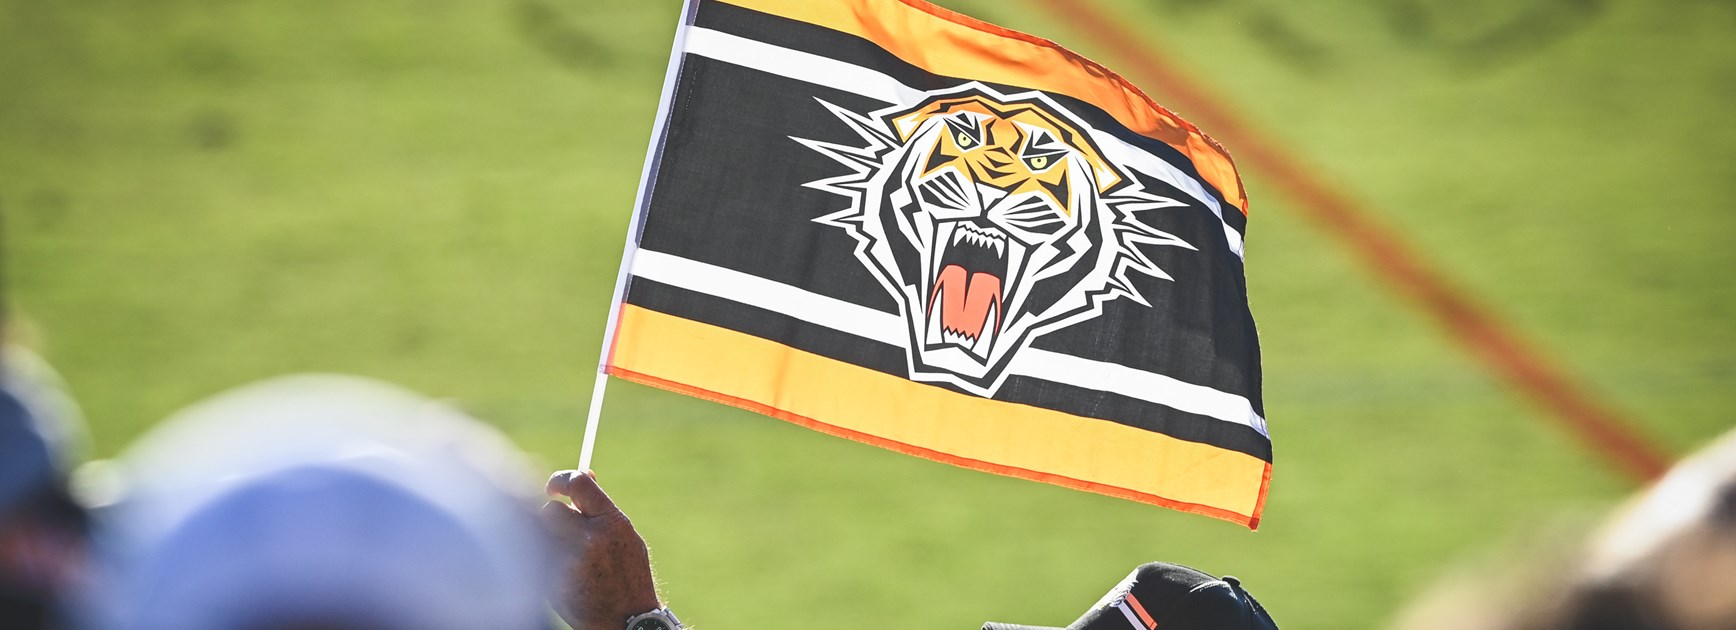 Wests Tigers supporting Sydney businesses with unique digital opportunity